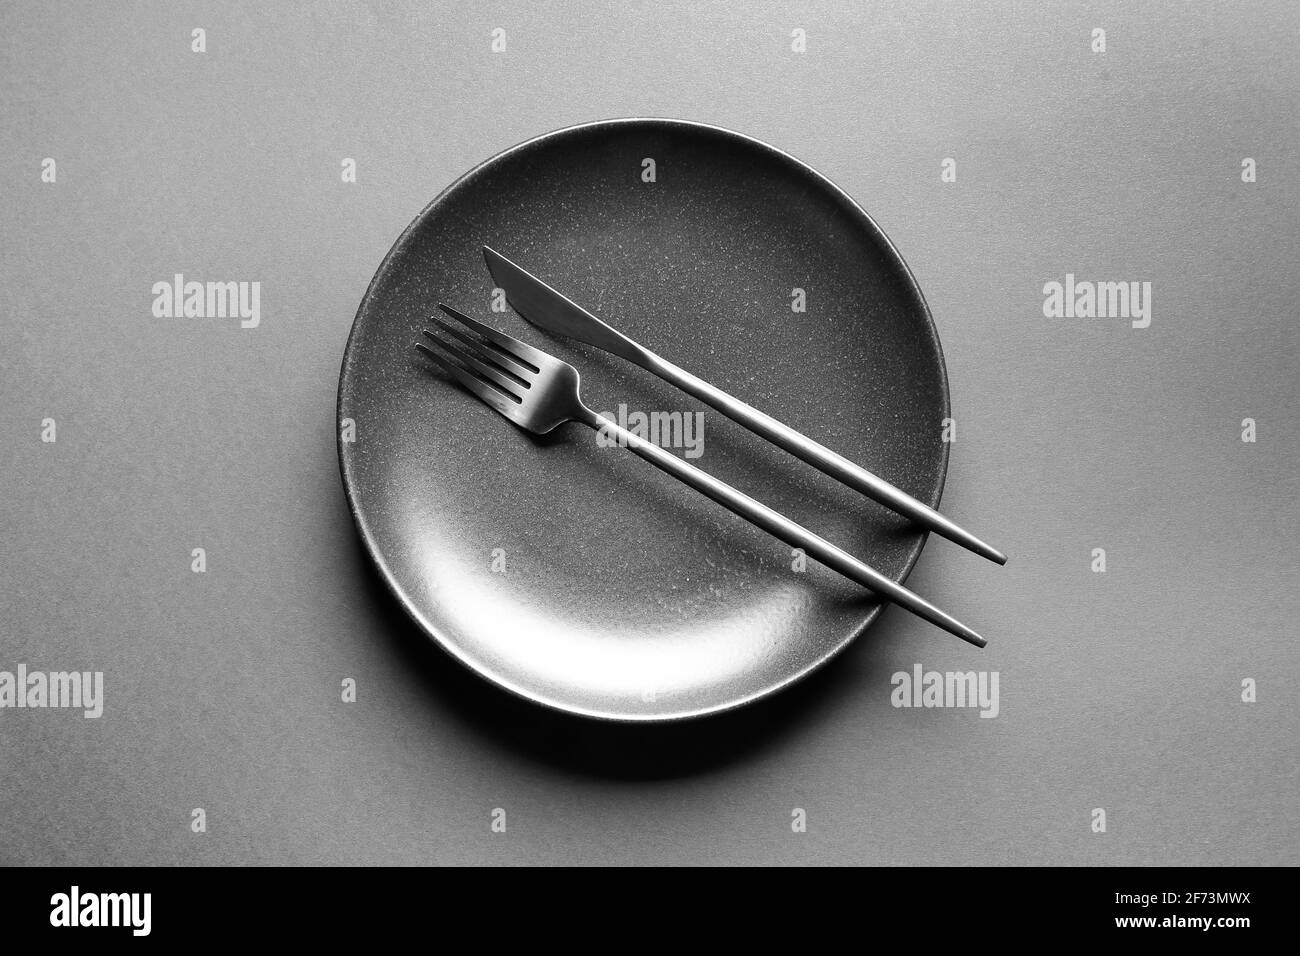 Plate and cutlery on dark background Stock Photo